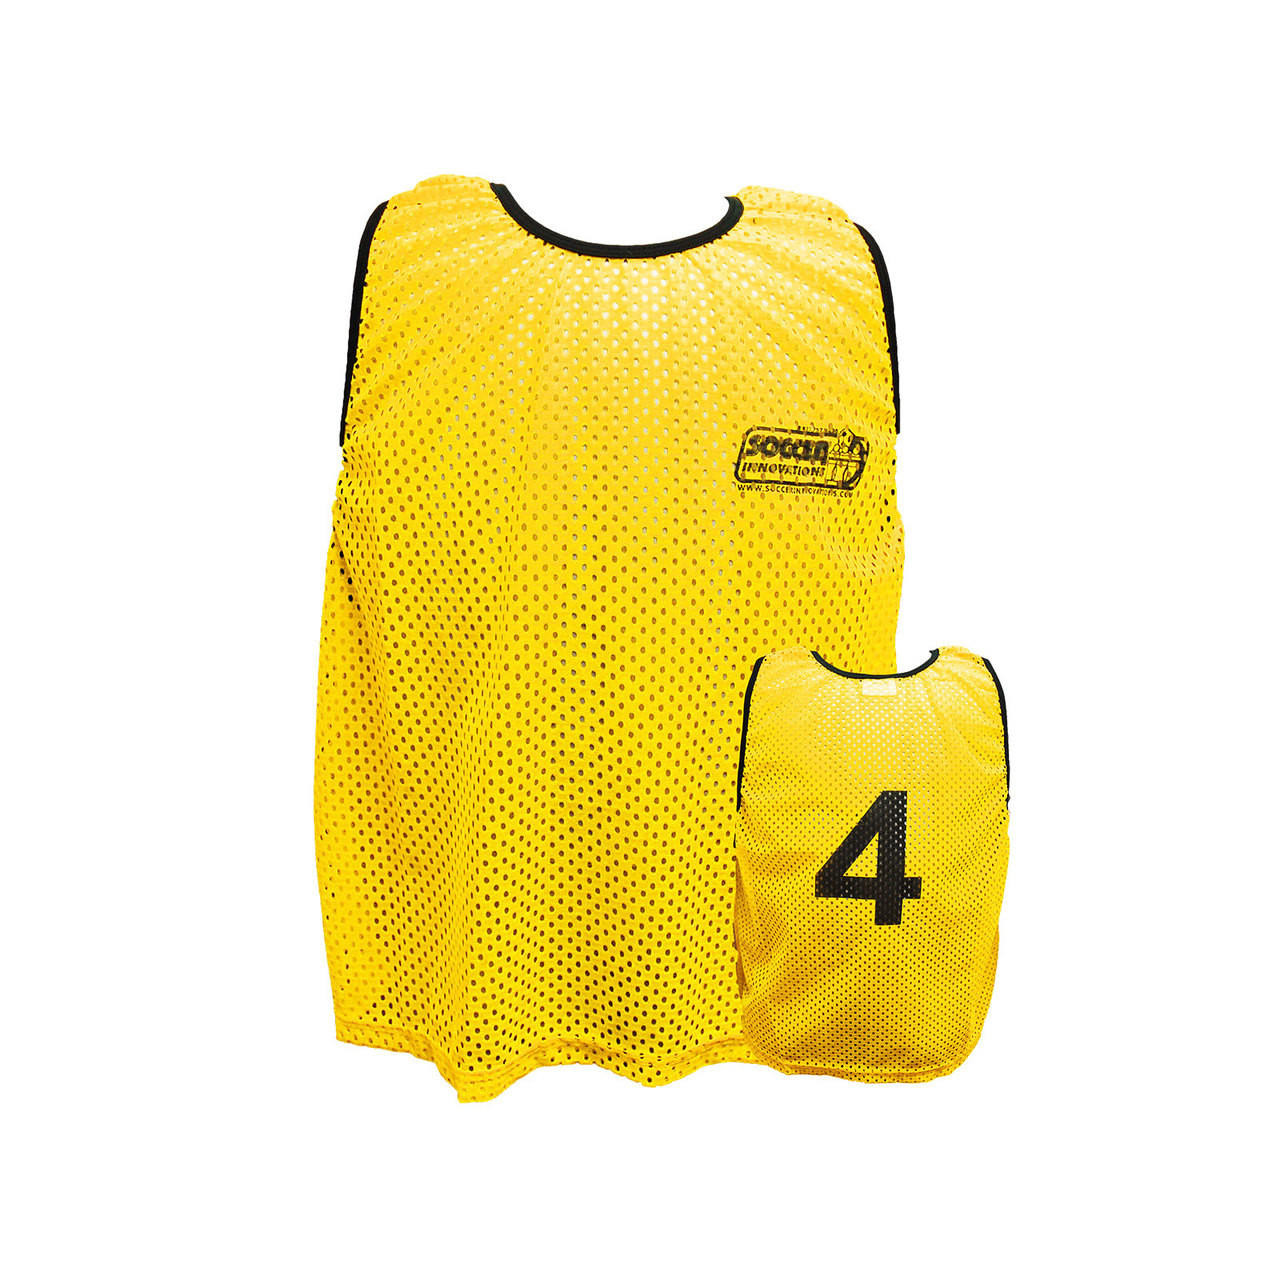 Machine Washable Sports Training Jerseys Bibs. Numbered Front and Back  Pinnies for Game Play. Comfortable Polyester Vests